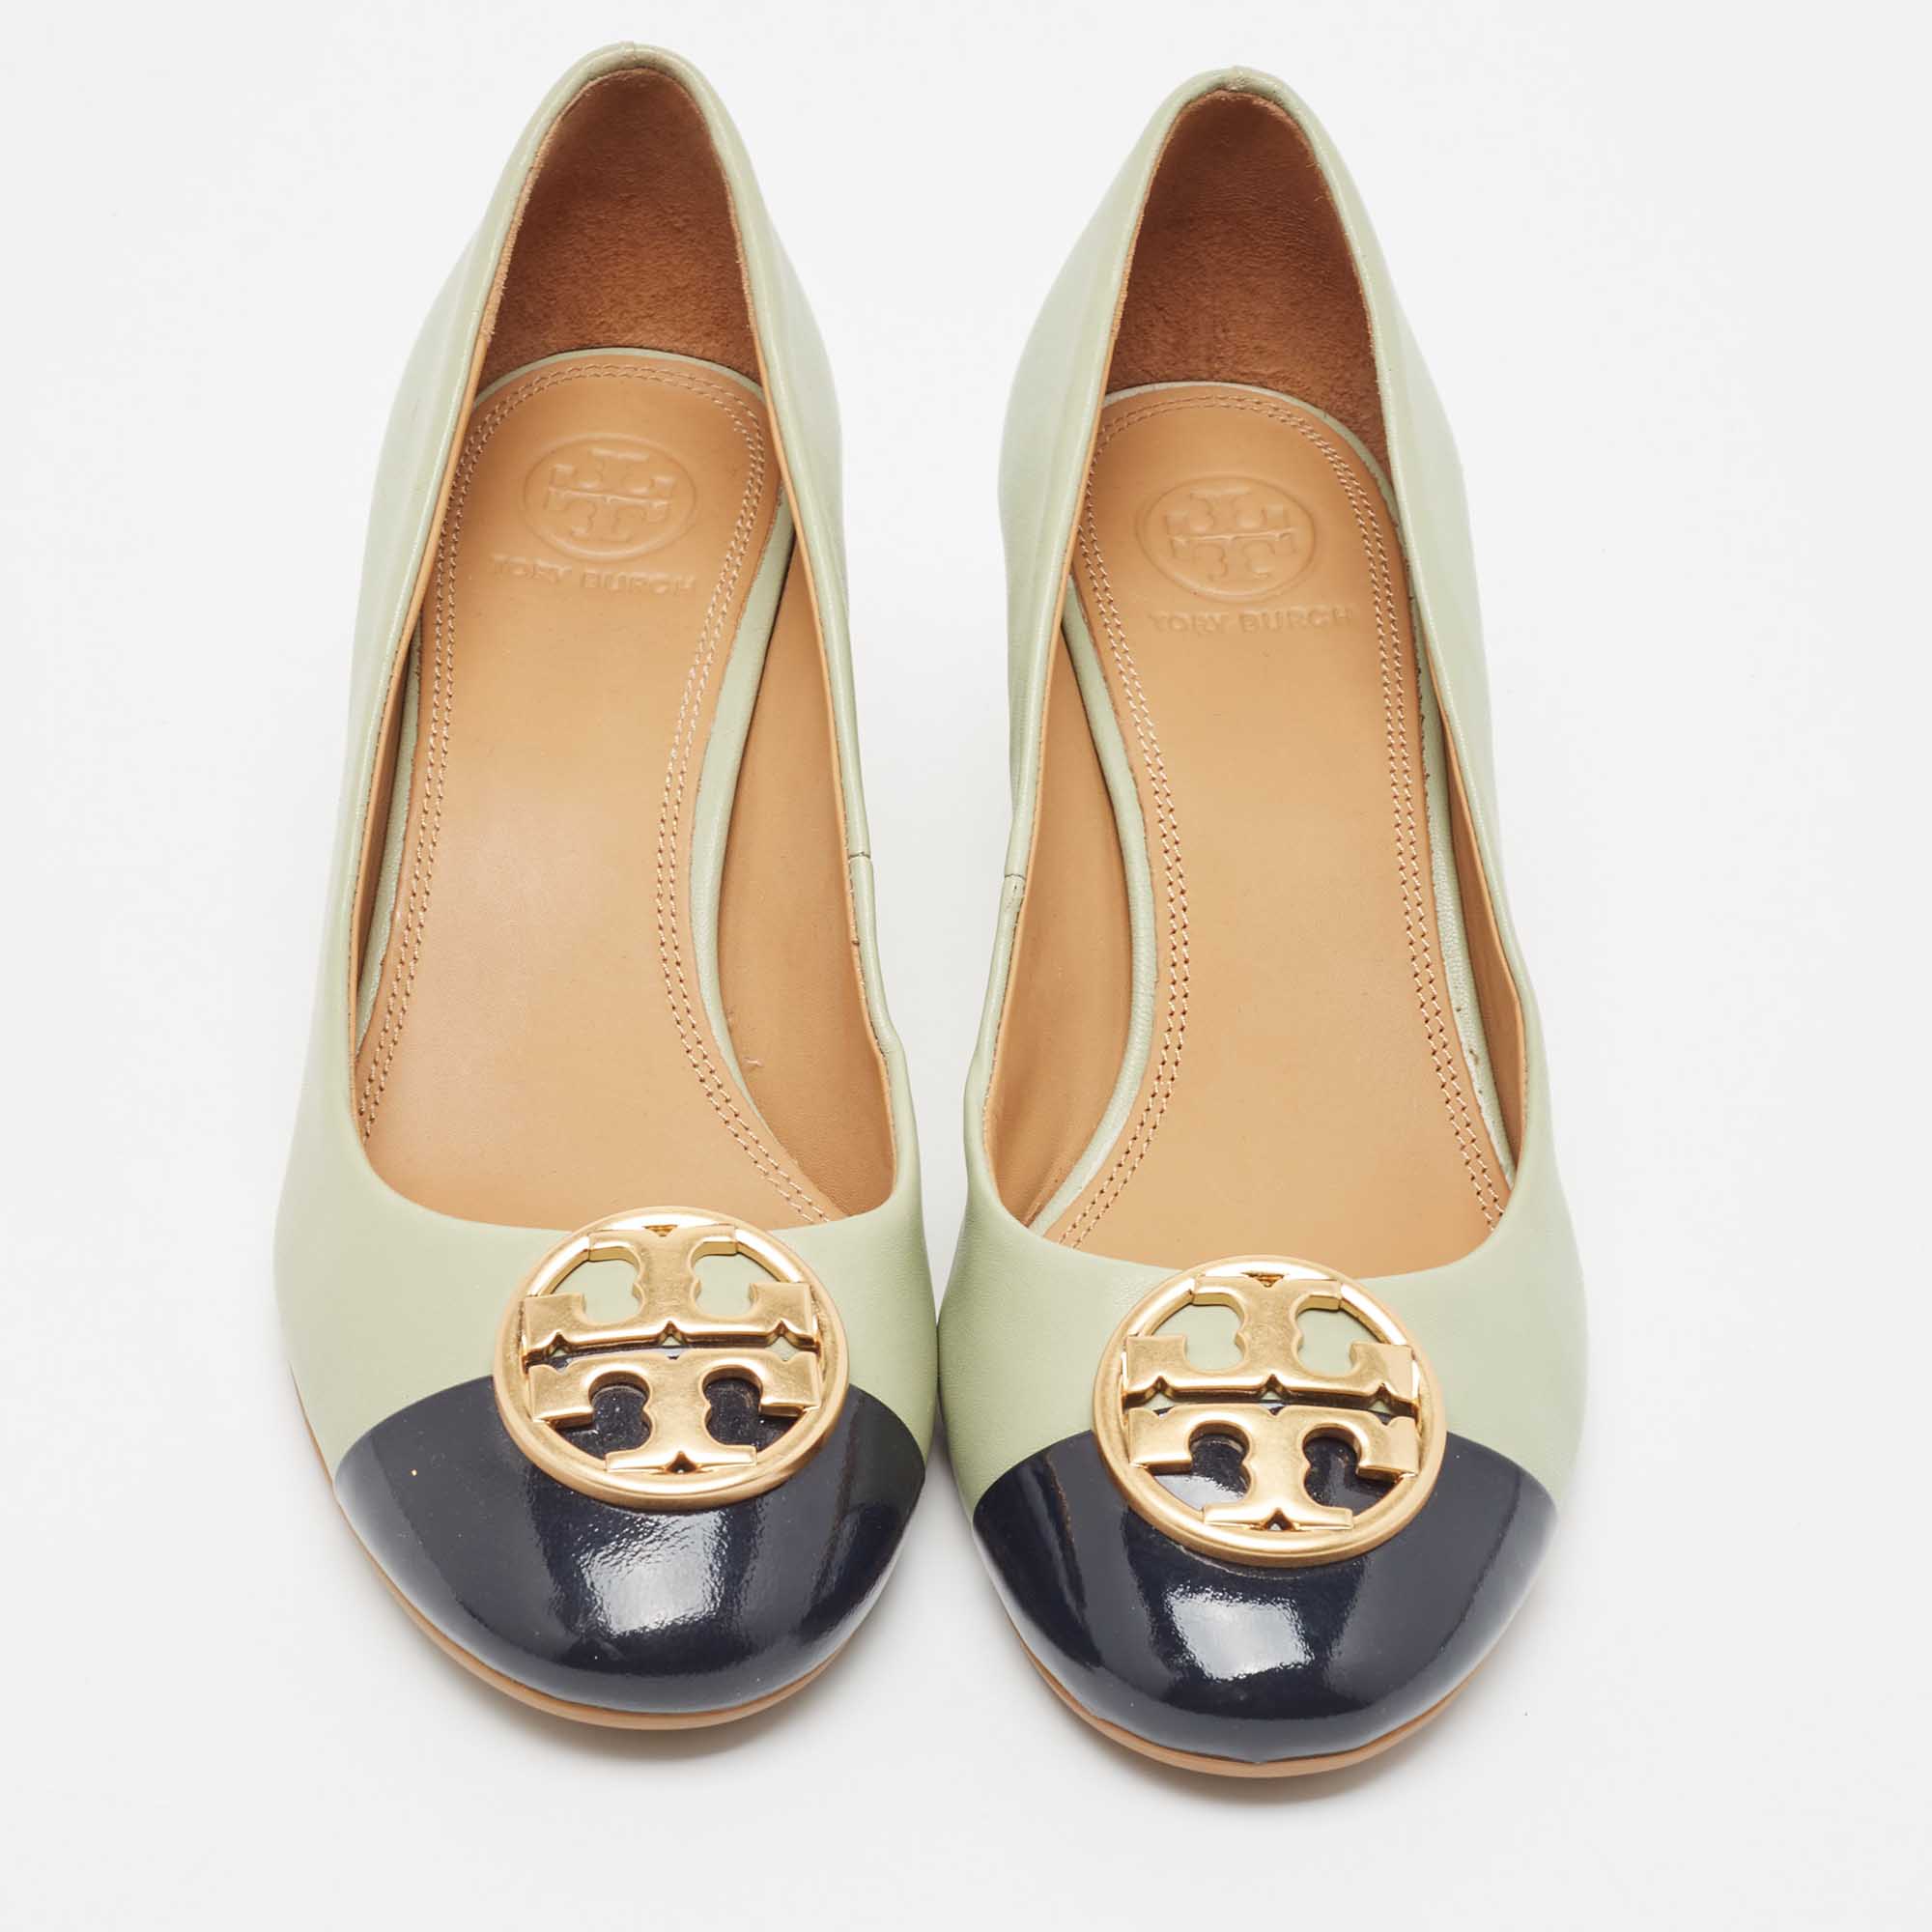 Tory Burch Green/Black  Patent And Leather Chelsea Pumps Size 37.5